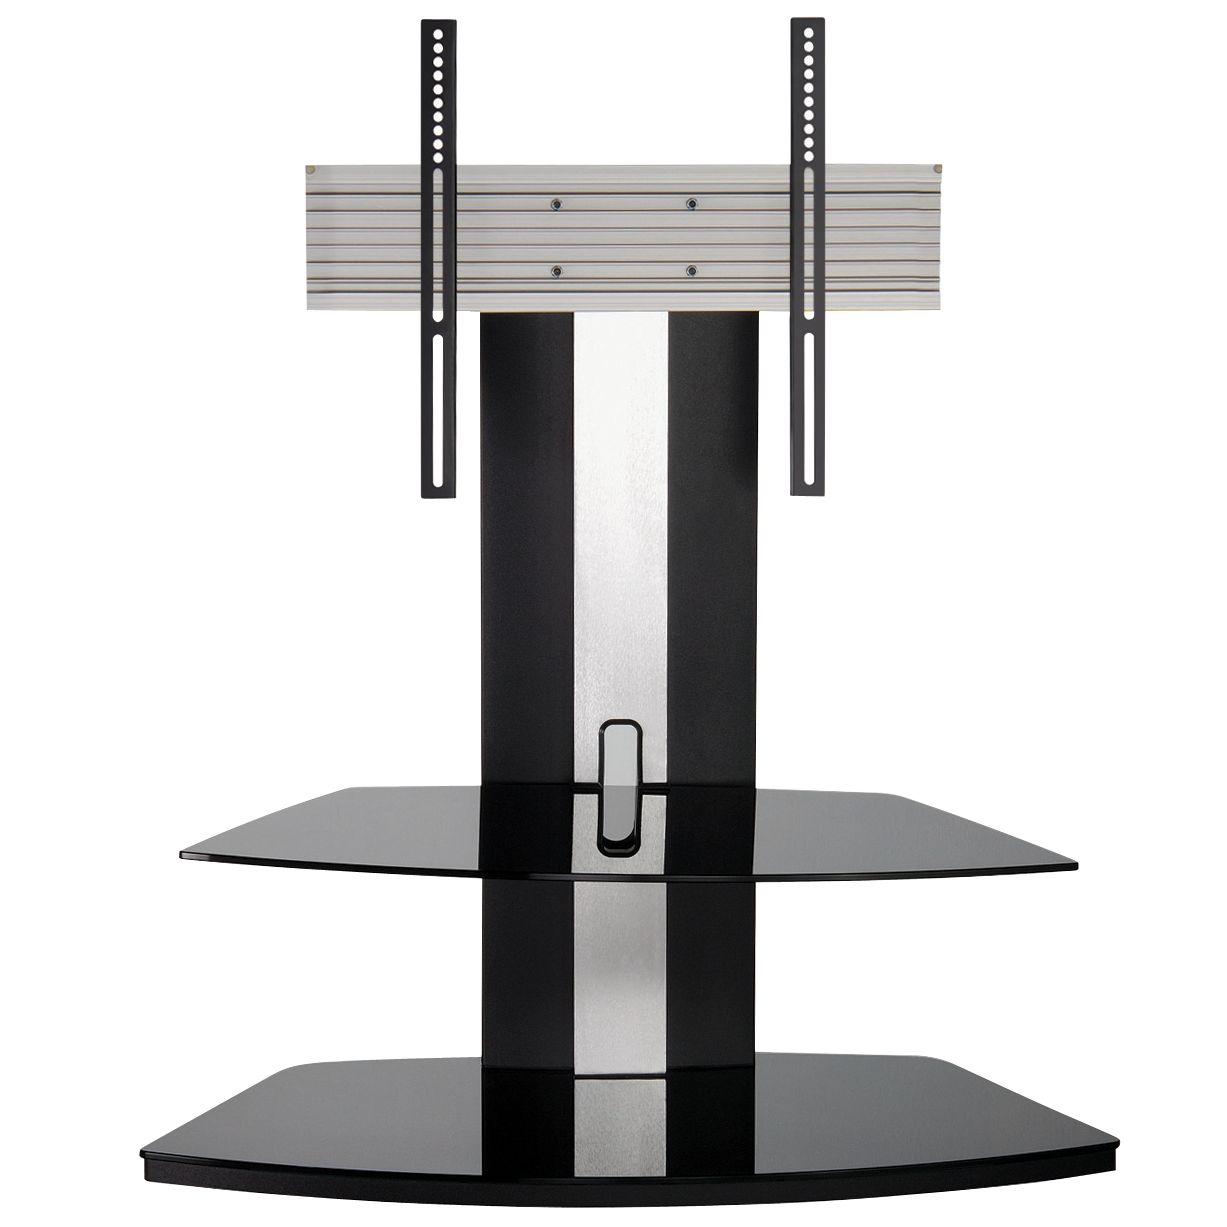 Alphason Iconn ST600 90-B Television Stand at John Lewis